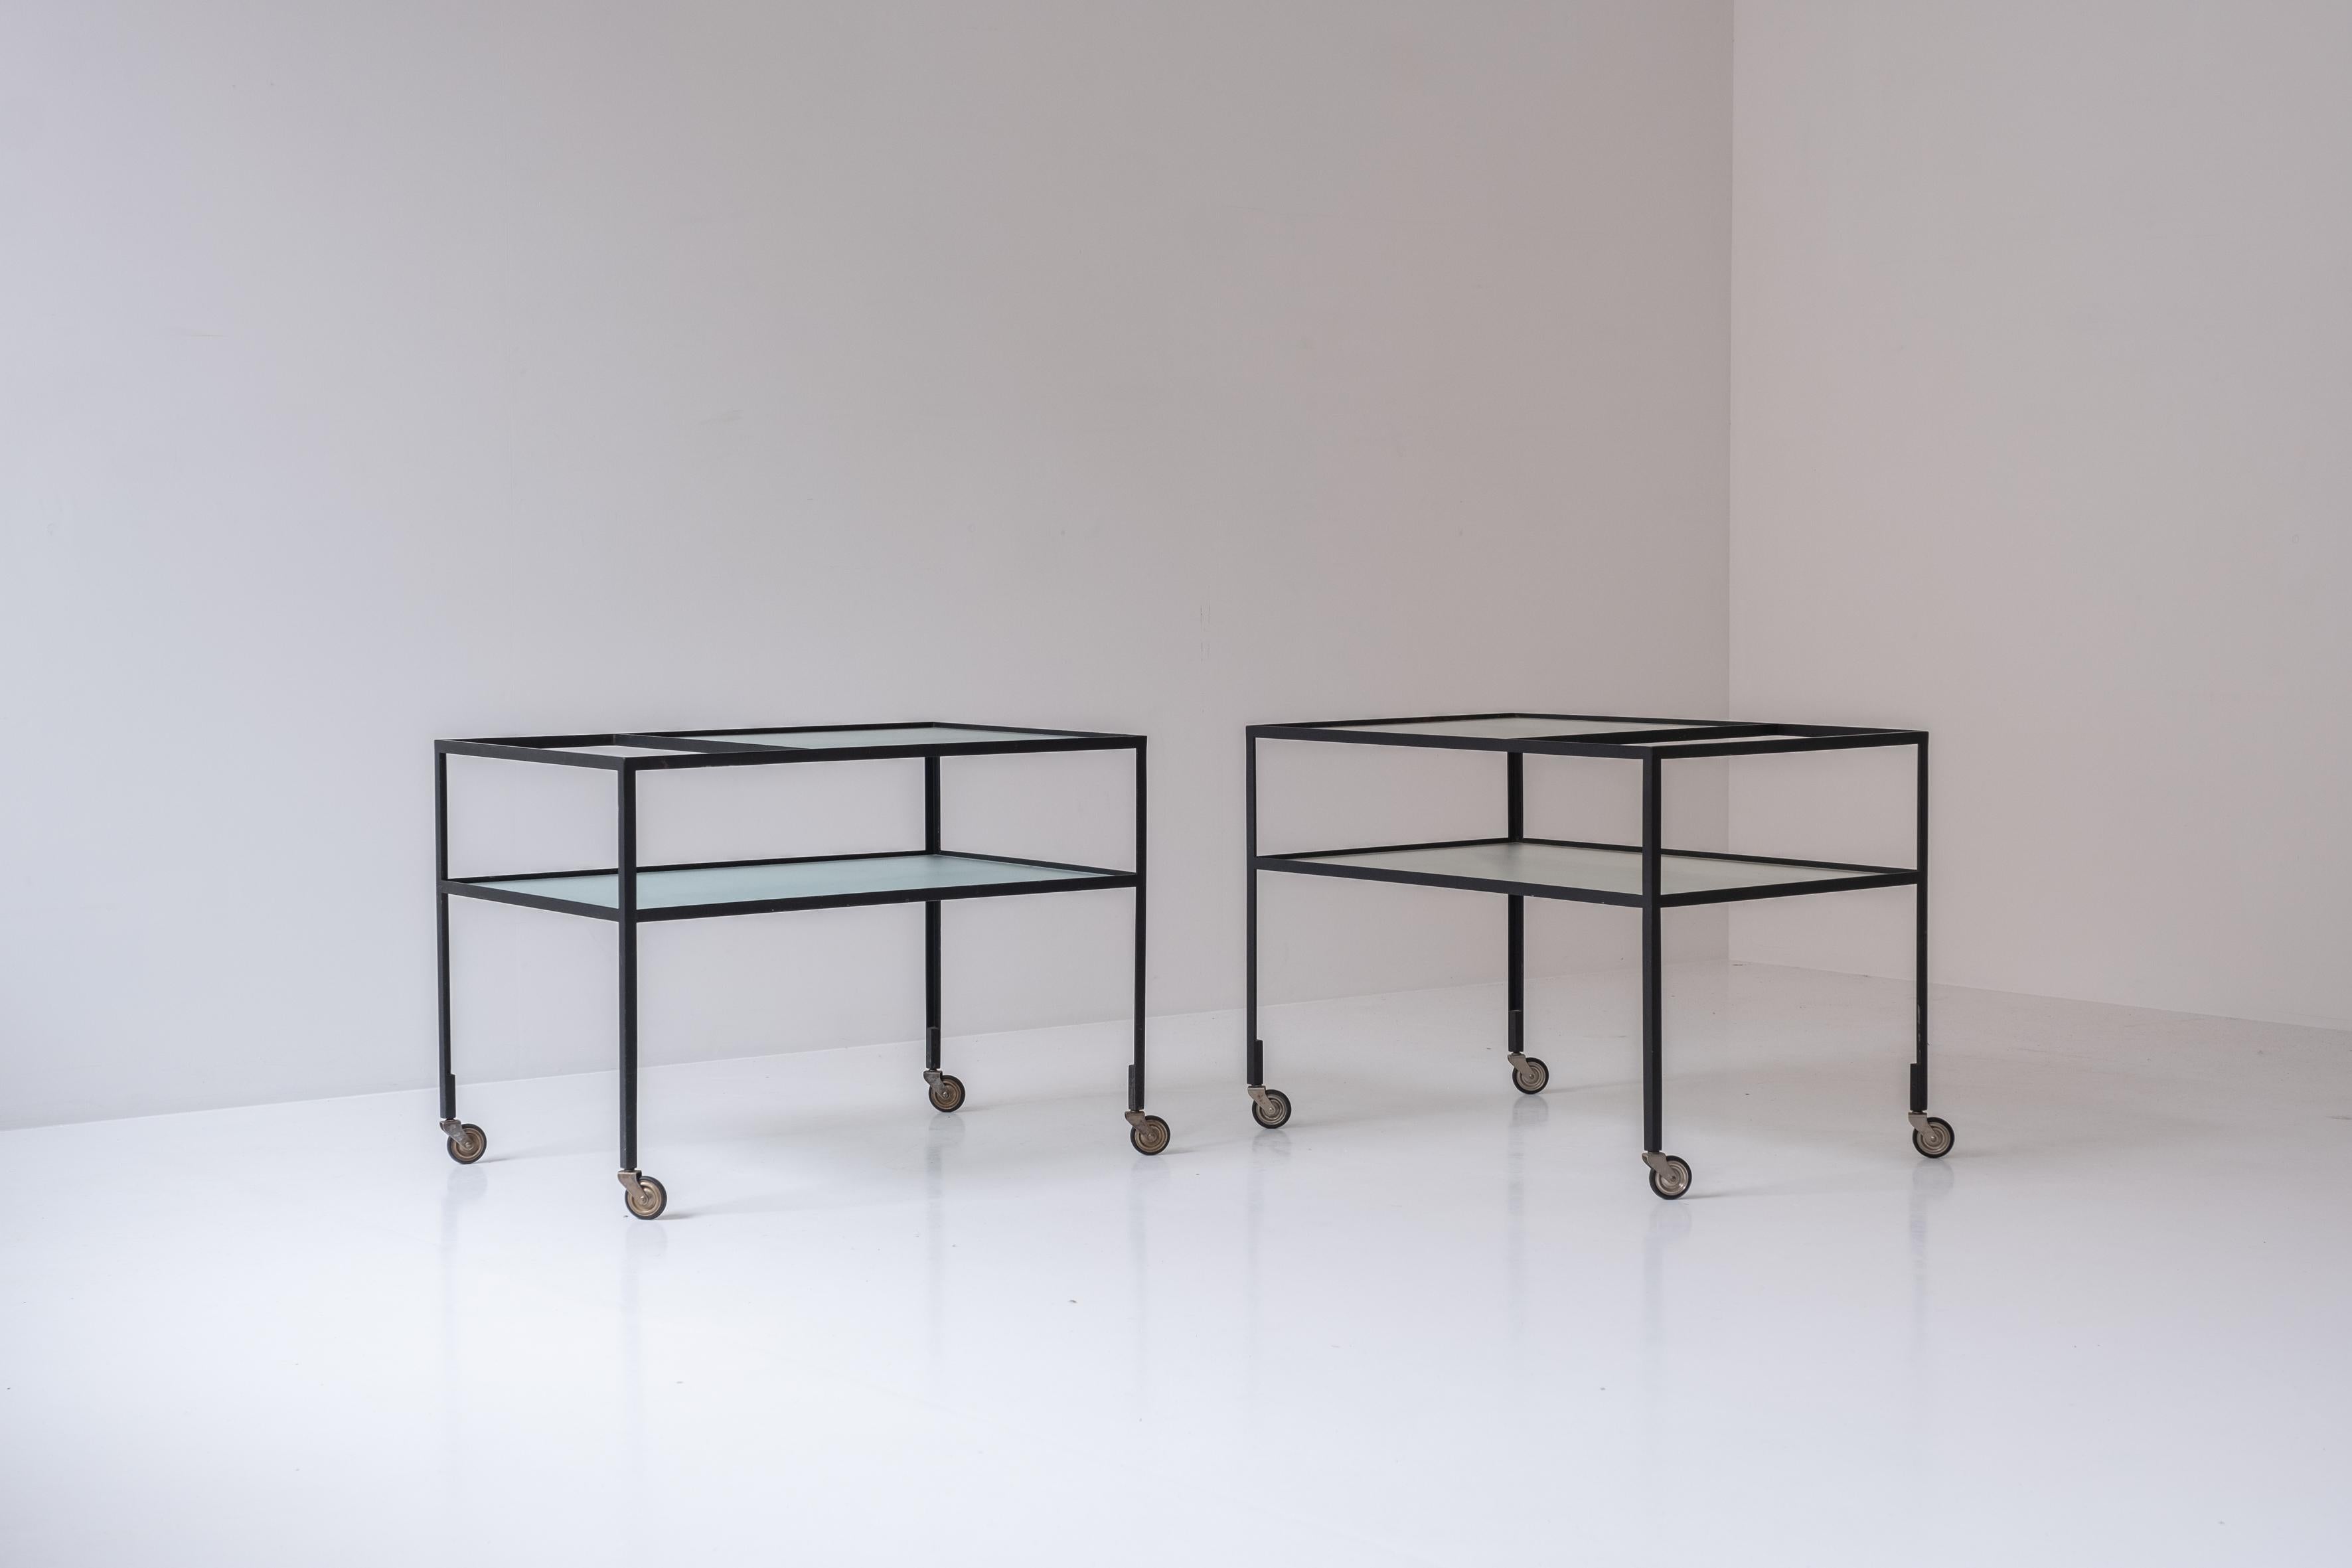 Early edition serving trolley by Herbert Hirche for Christian Holzäpfel KG, Germany 1956. This bar cart features a black lacquered steel frame and holds the original ribbed glass plates. An identical set is available. Priced per piece. Well